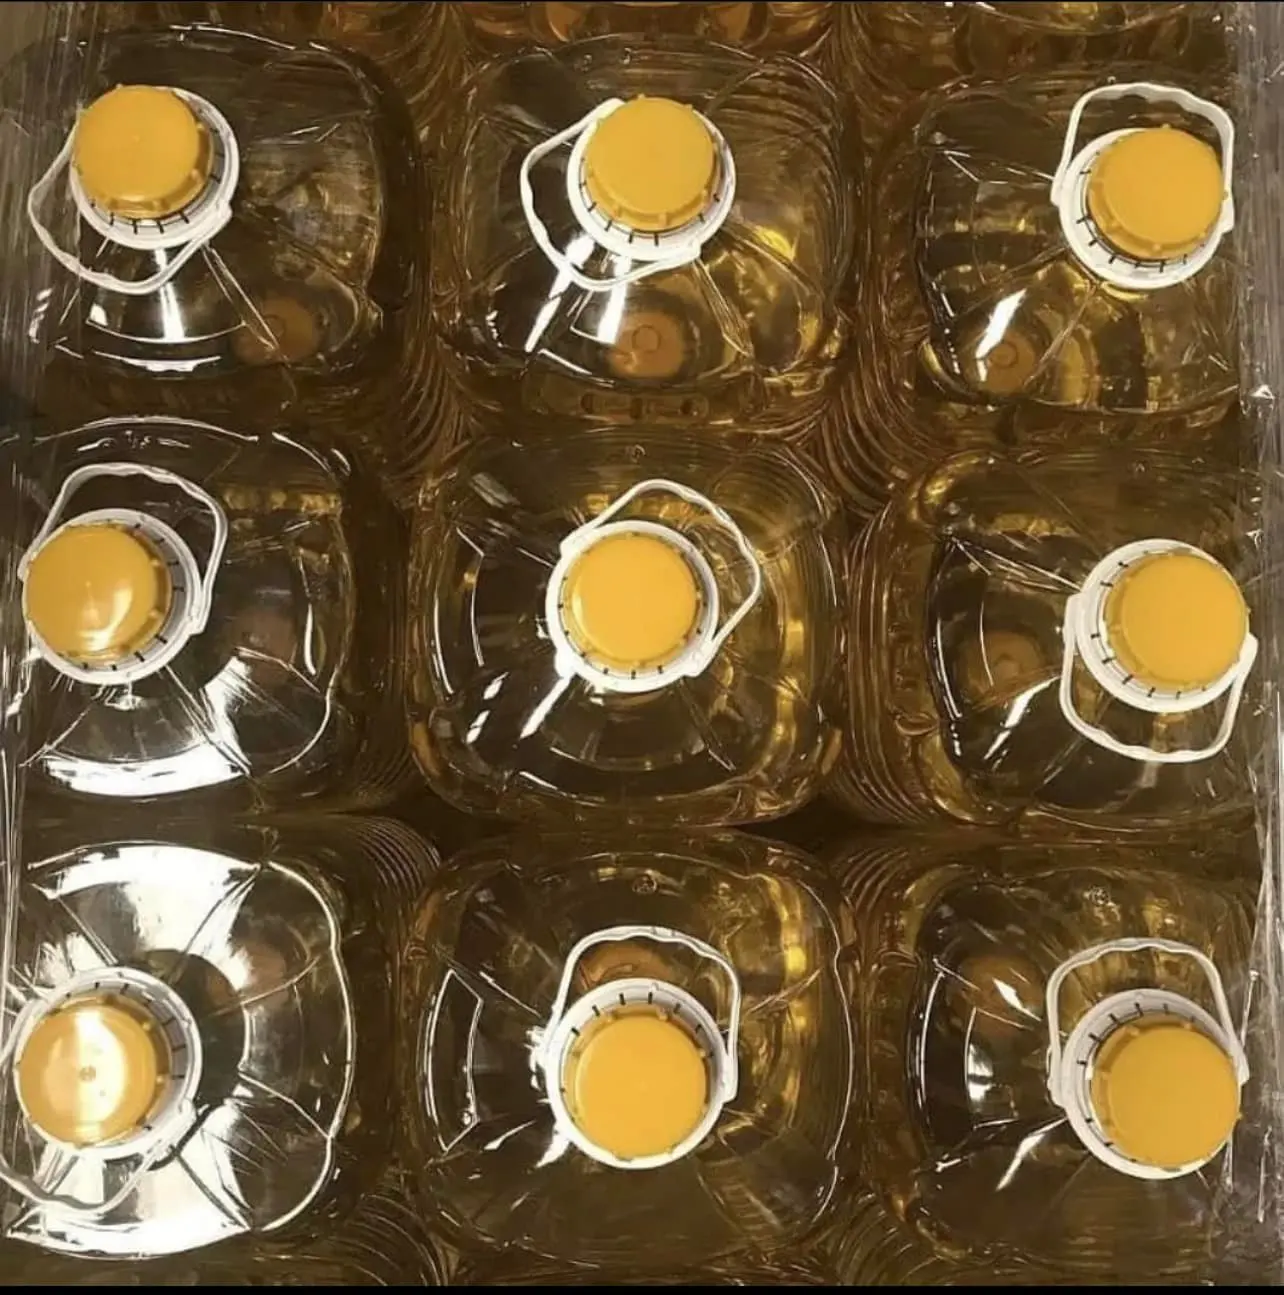 Refined Sunflower Oil / Sunflower Cooking Oil Wholesale